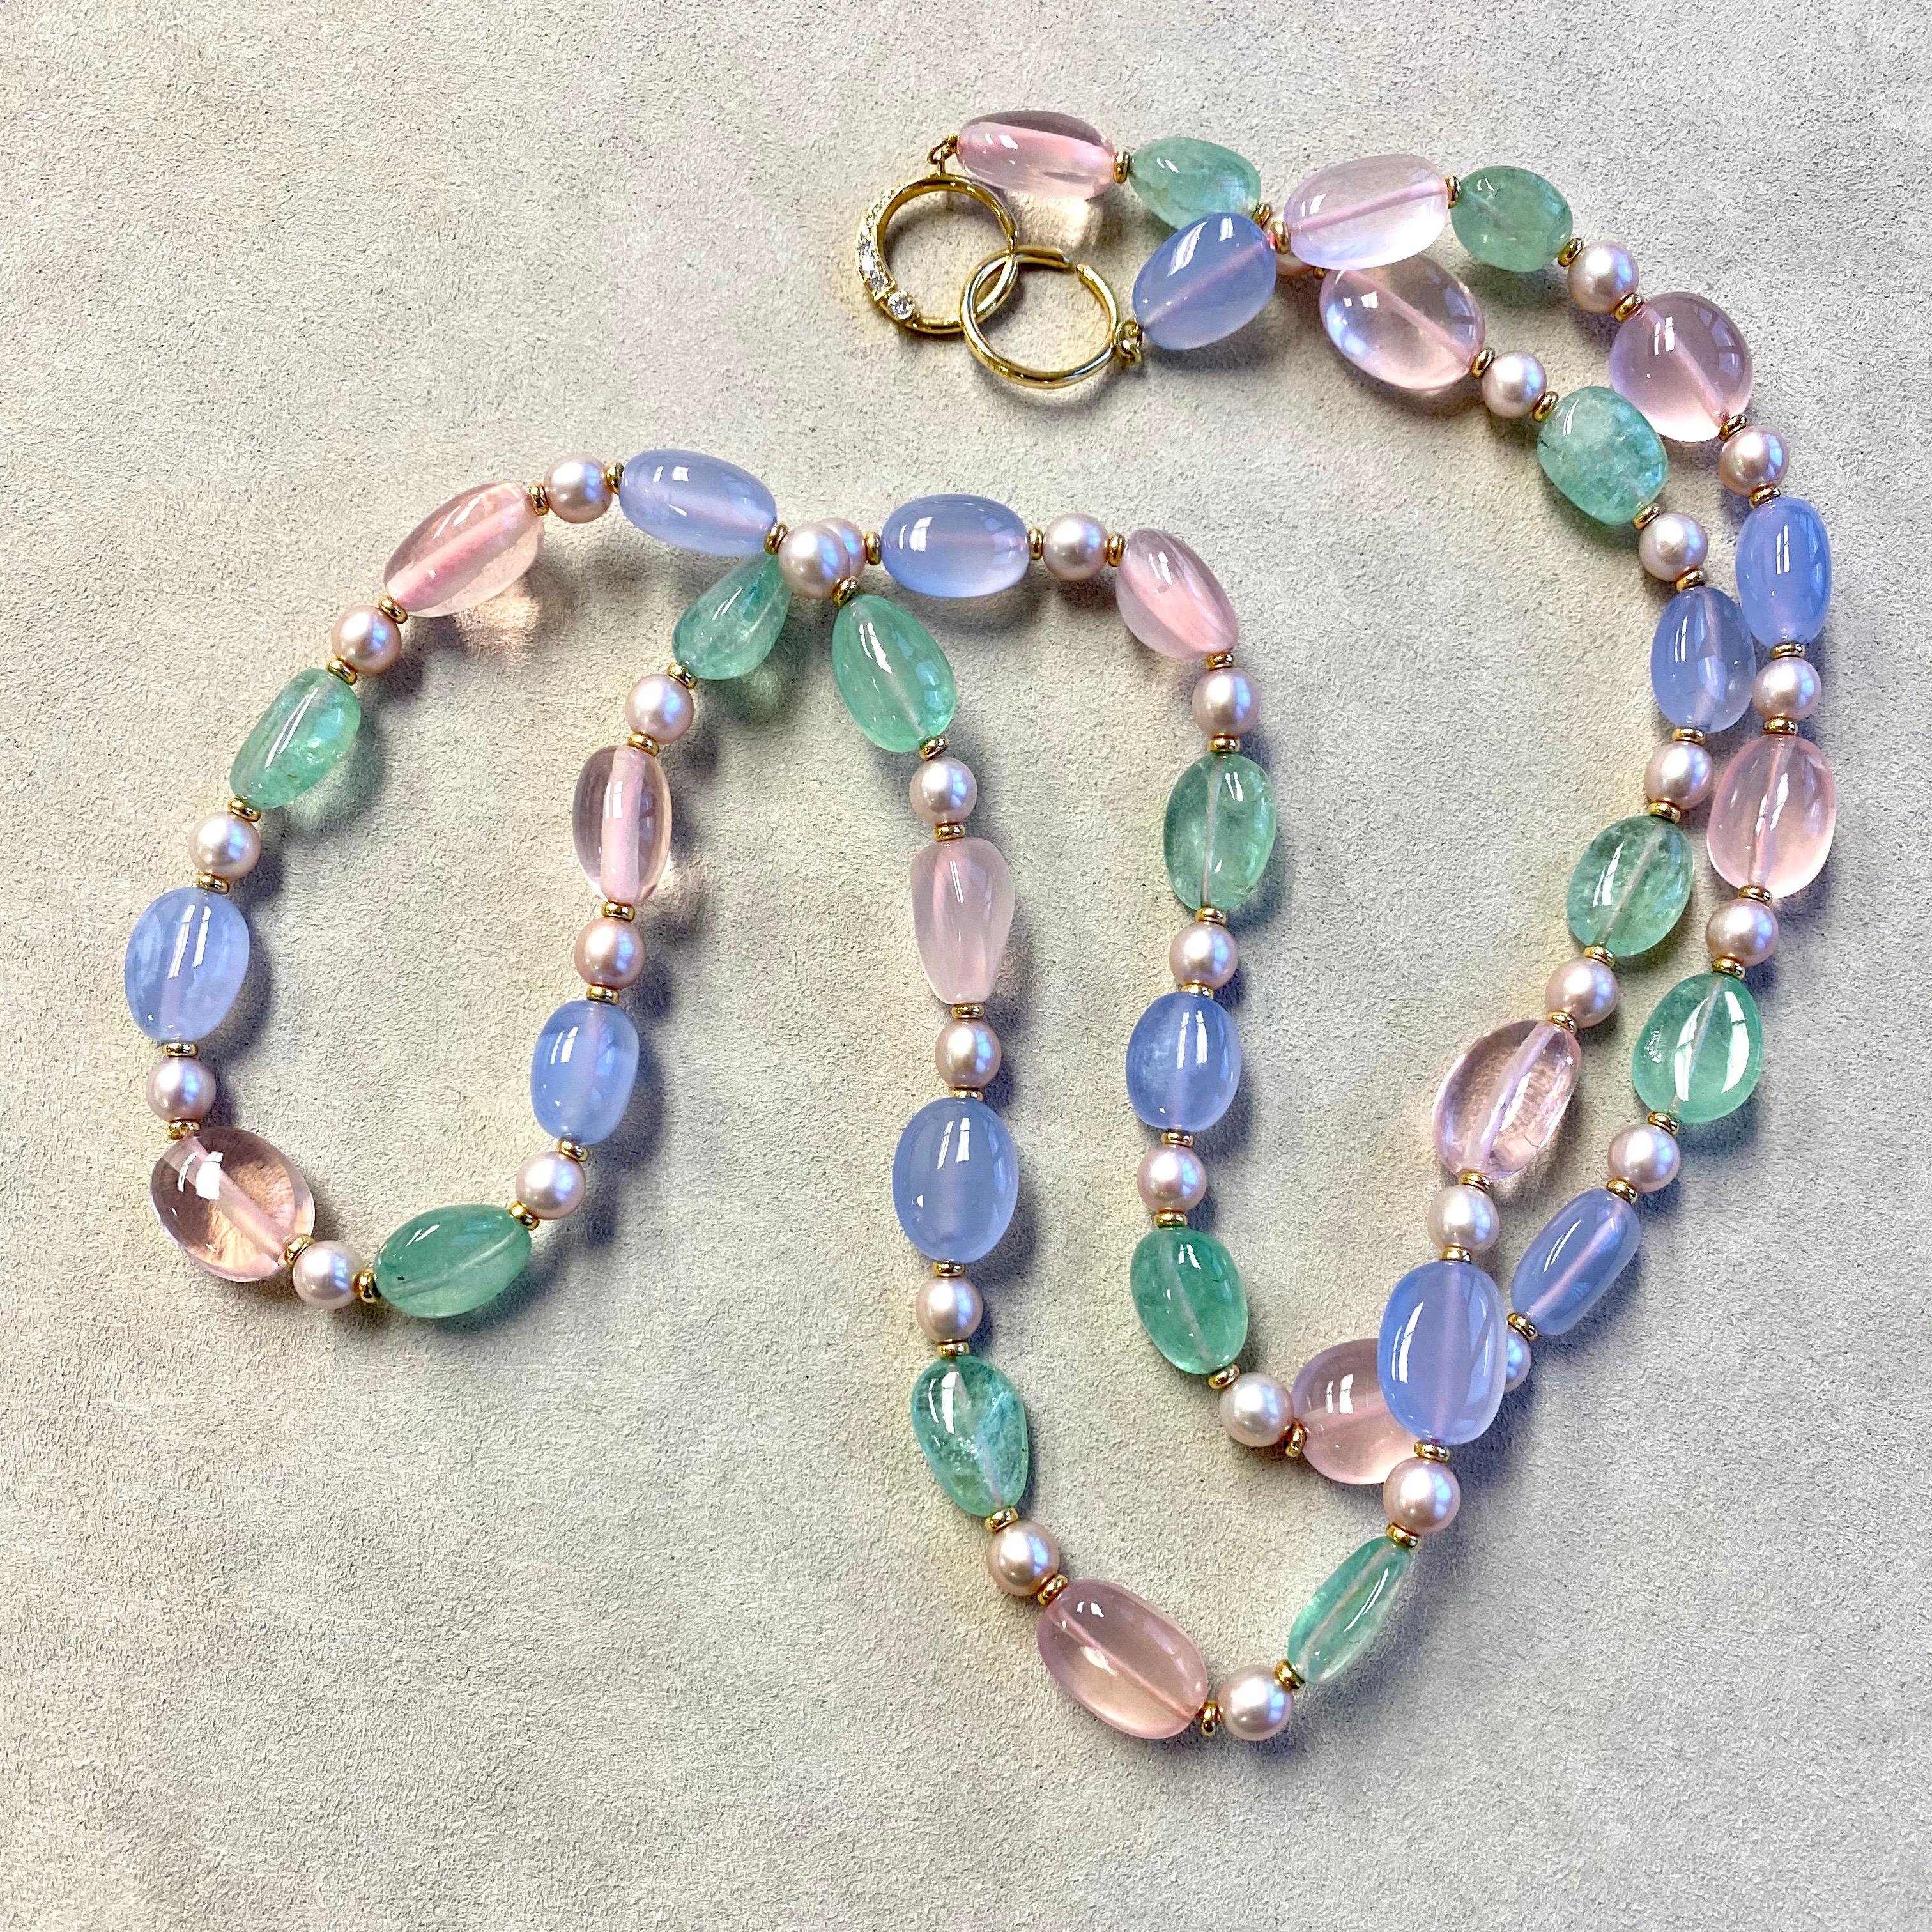 18 karat yellow gold
36 inch
Rose Quartz, Emerald, Blue Chalcedony Beads 410 carats approx.
Freshwater Pearls 70 carats approx.
18k yellow gold roundels 
18k yellow gold circle clasp
Strung on silk
Limited edition

About the Designers

Drawing